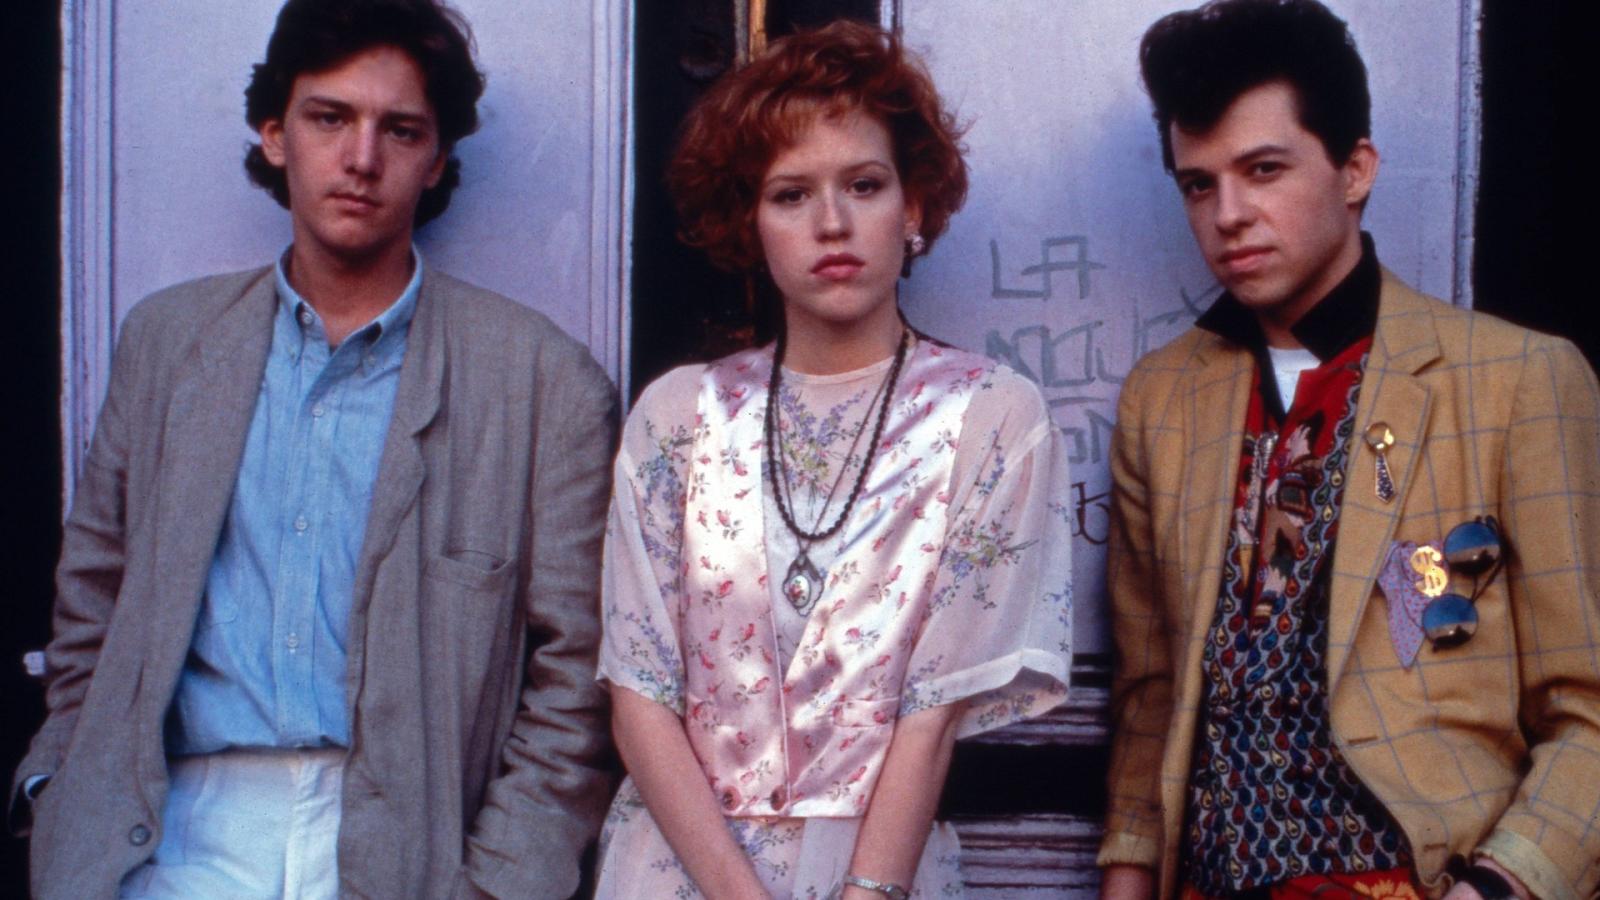 15 Coming-of-Age Movies that Defined the 80s - image 8